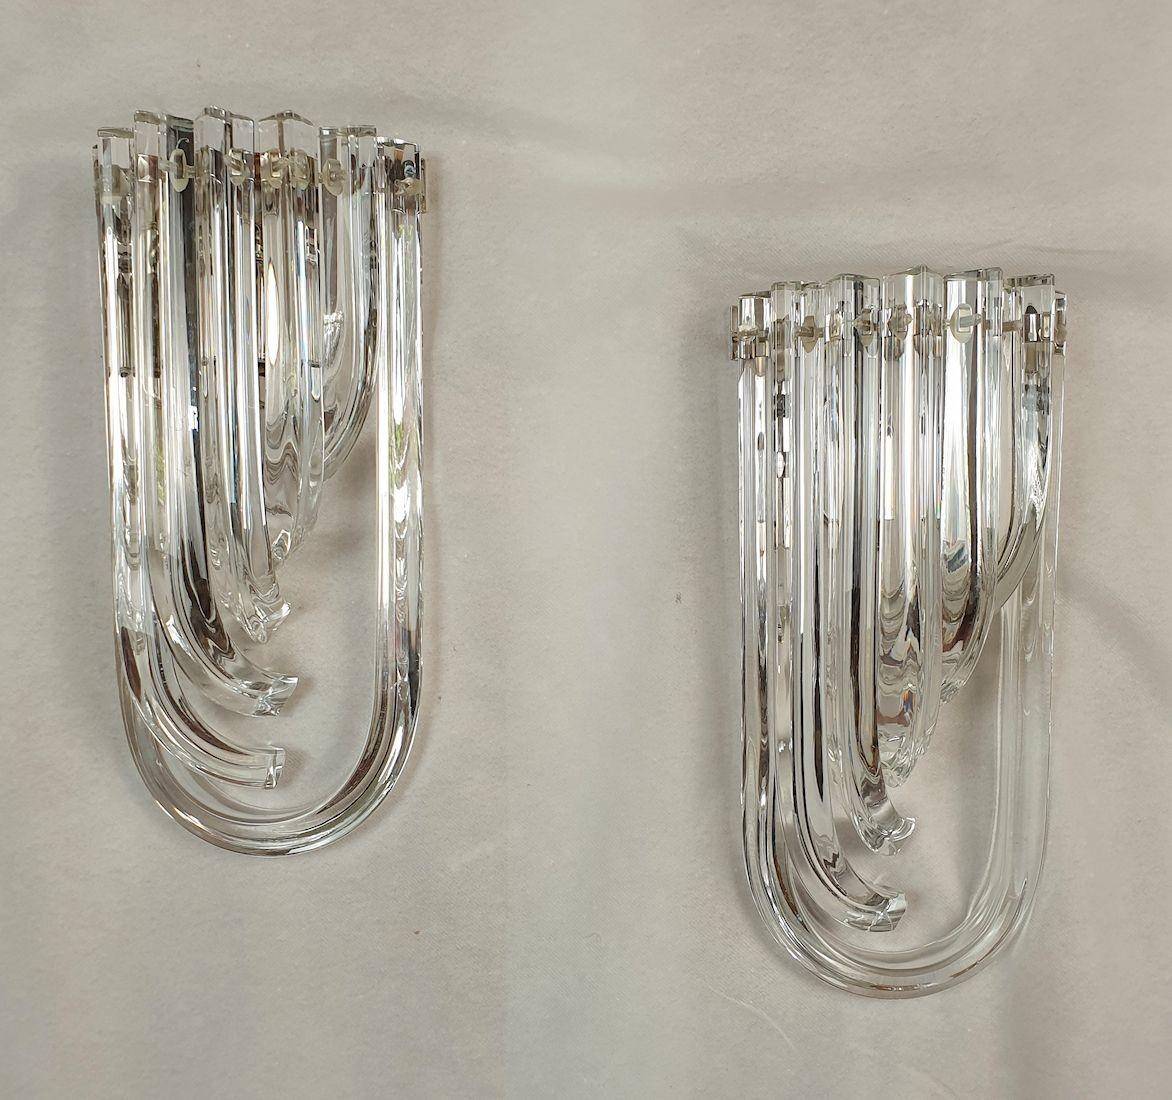 Pair of Modernist vintage Murano glass sconces, by Venini Italy circa 1980s.
Venini famous Triedri glass design, for those wall sconces, in clear handmade Murano glass, with a chrome frame.
Unusual and elegant curved shape.
The mid century modern